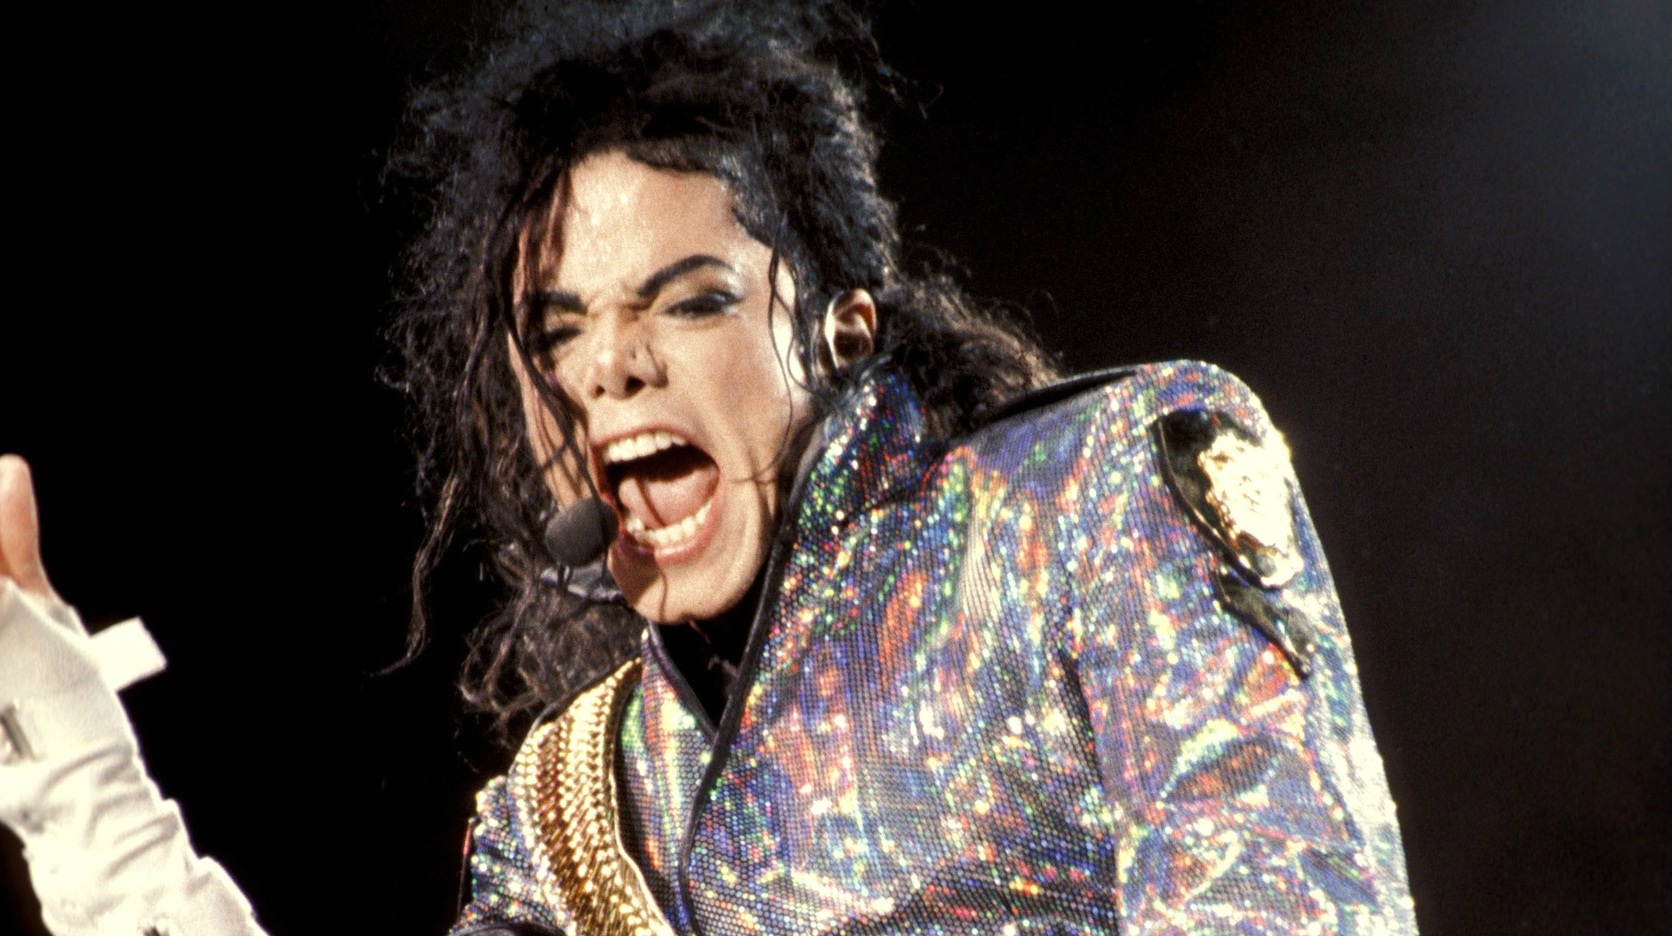 POLL: Which was Michael Jackson’s best song out of his 13 Number 1 singles? Vote Here.